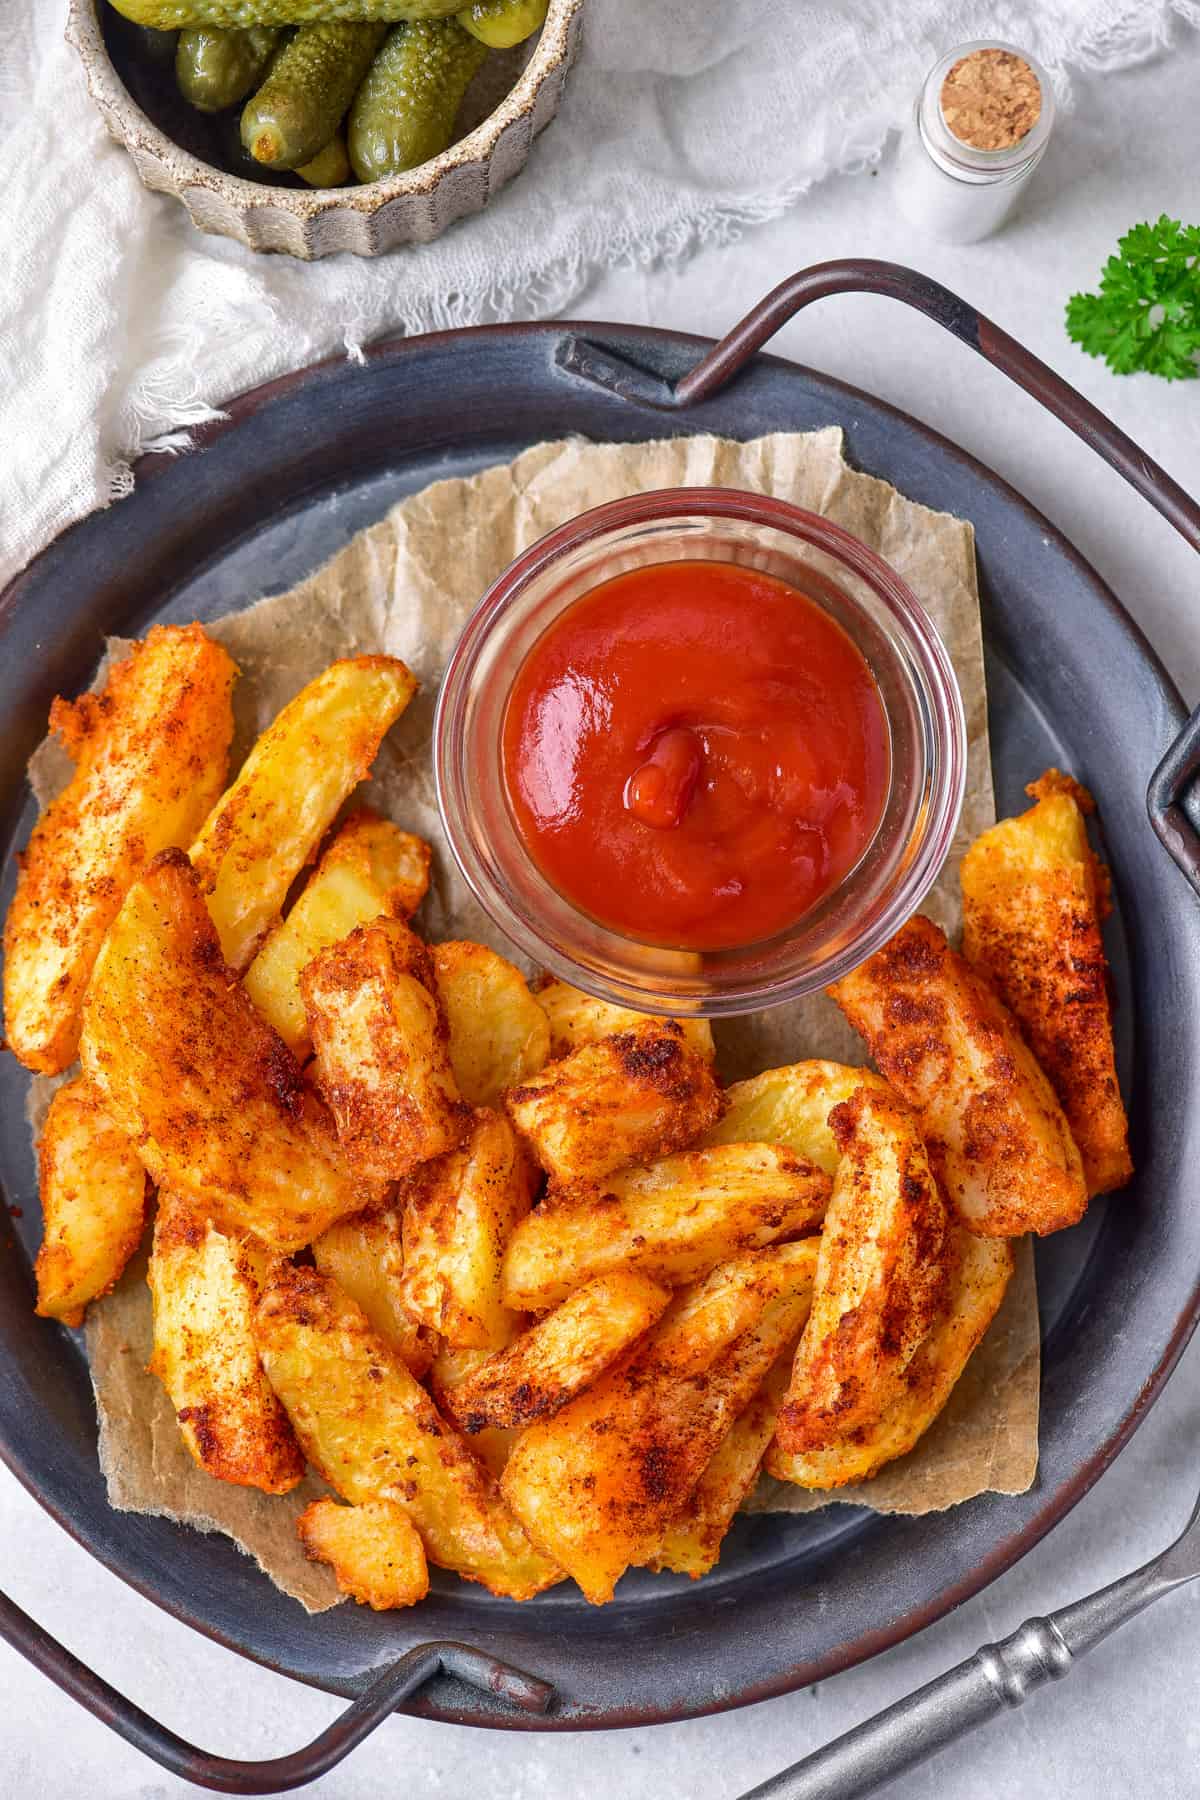 Plate of air fryer potato wedges and a dish of ketchup.